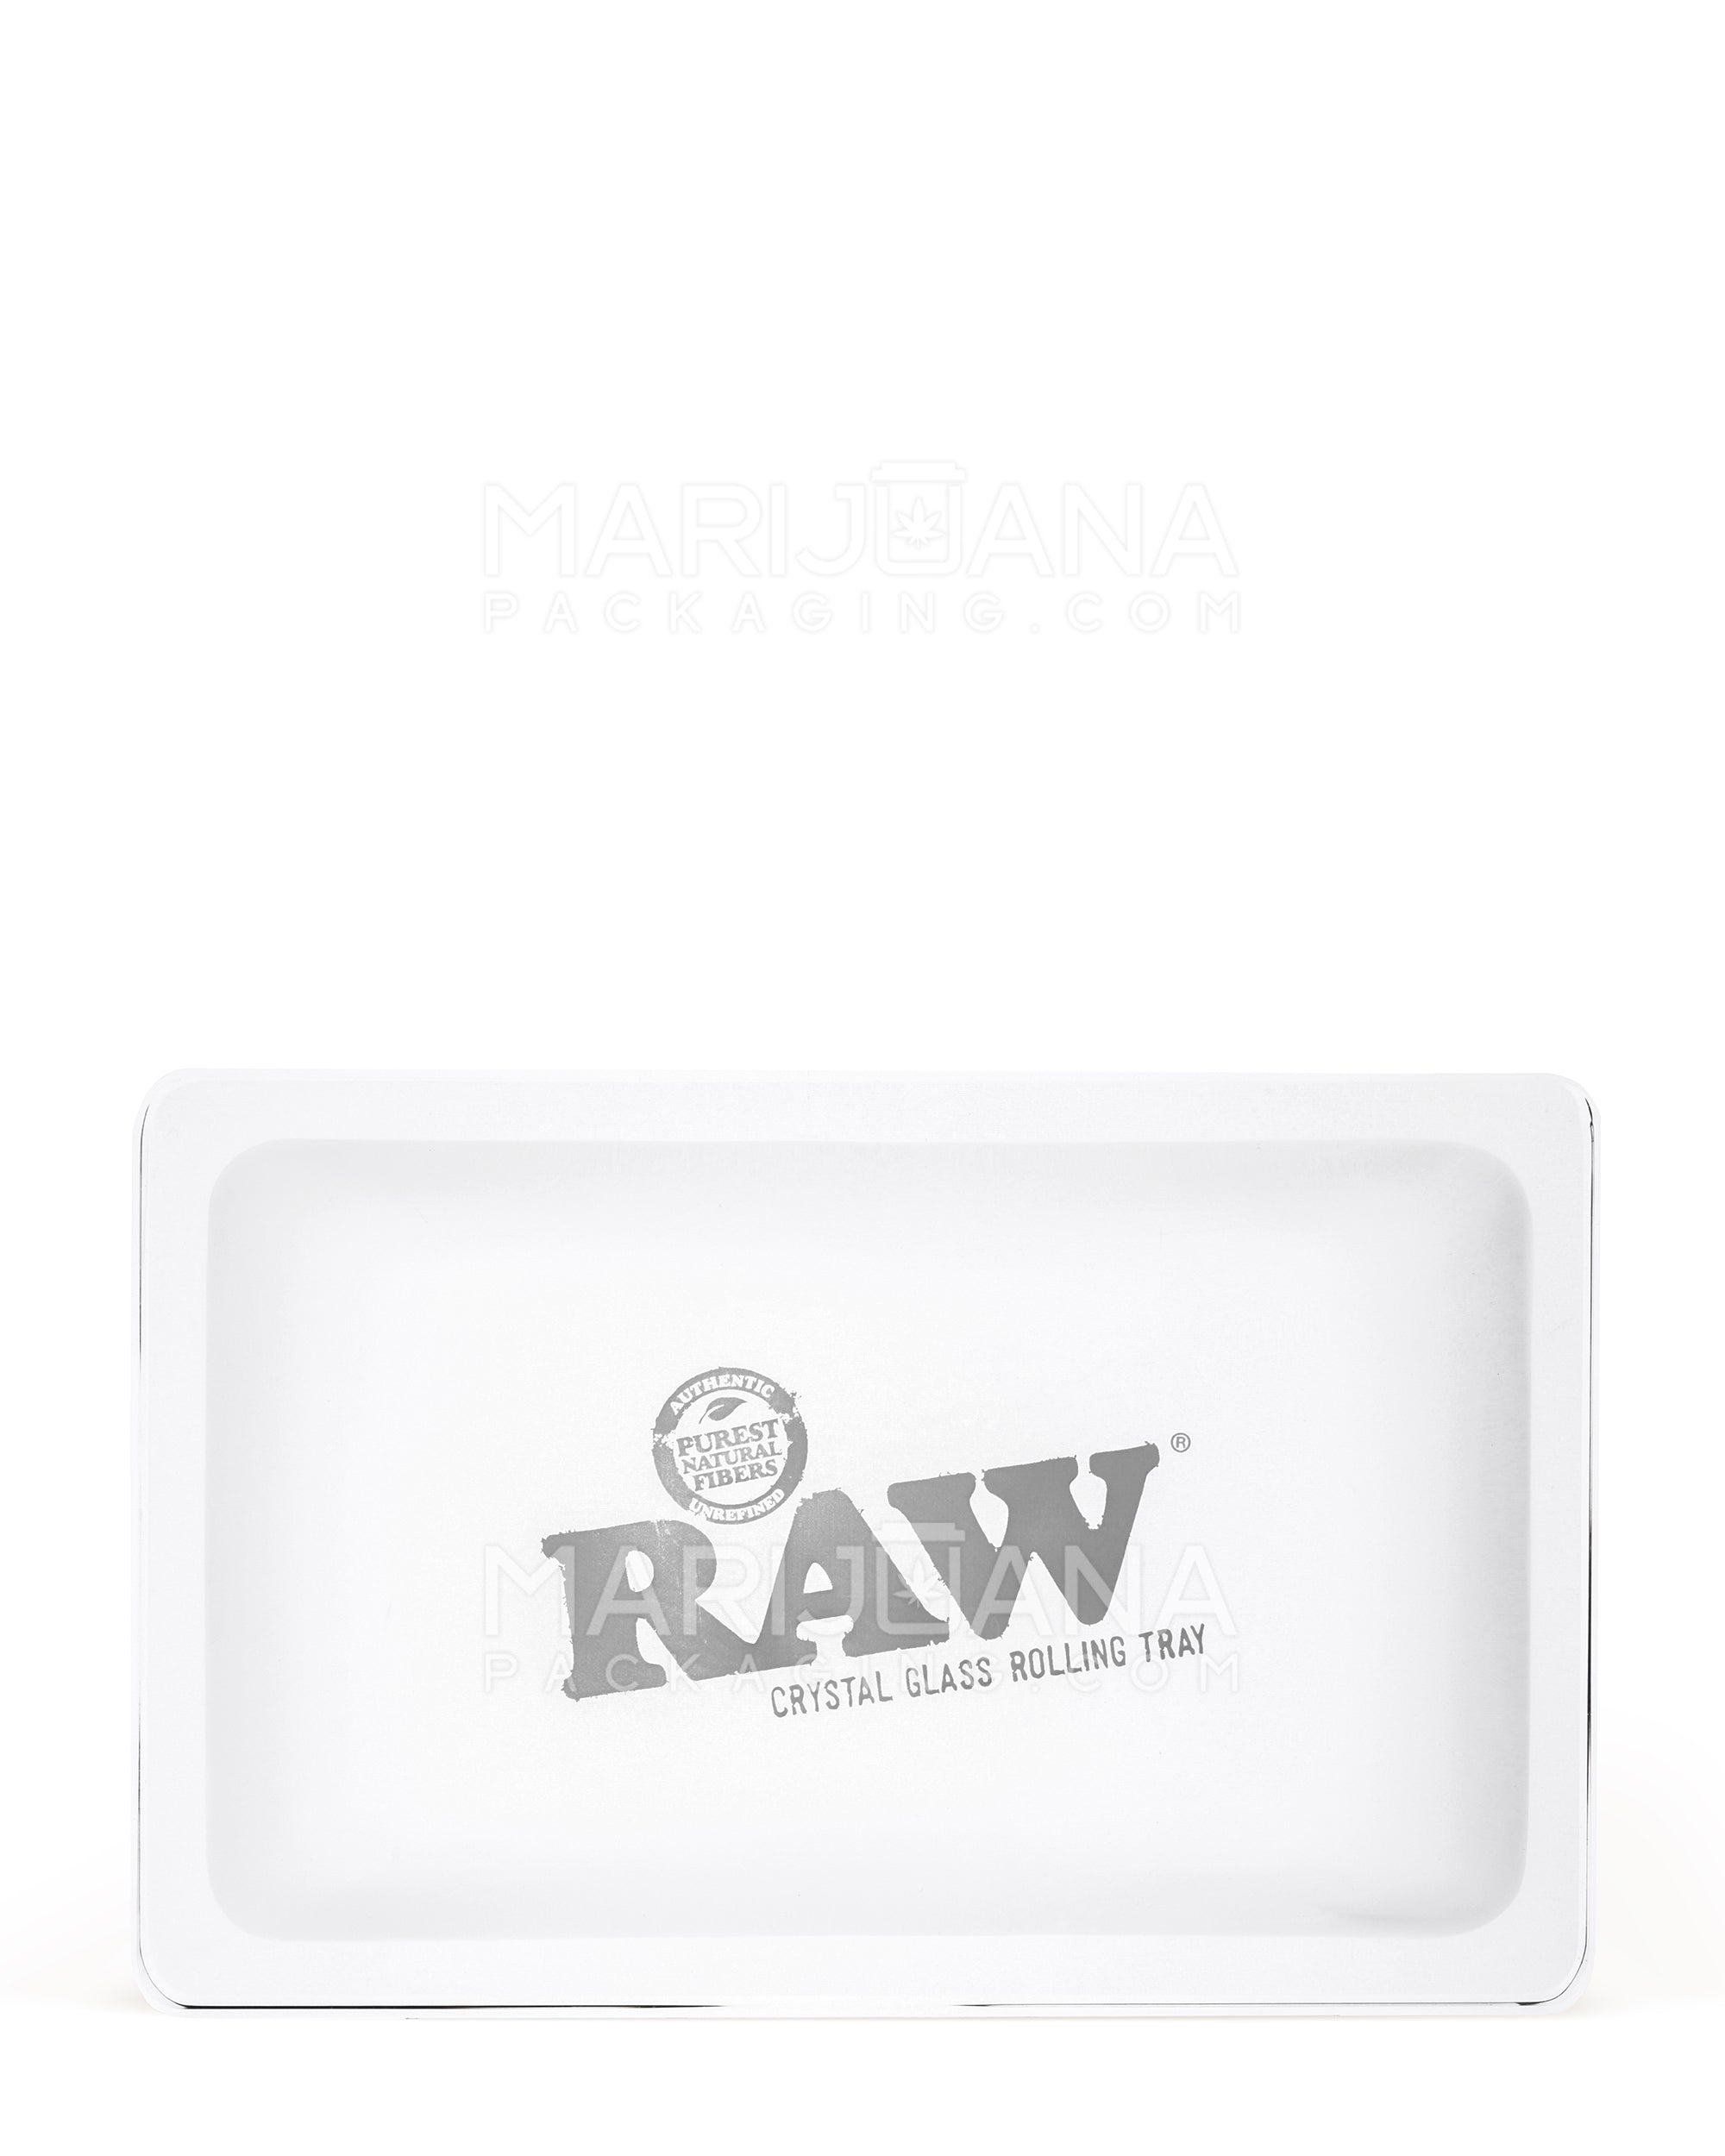 RAW | Crystal Glass Rolling Tray | 11in x 7in - Small - Glass